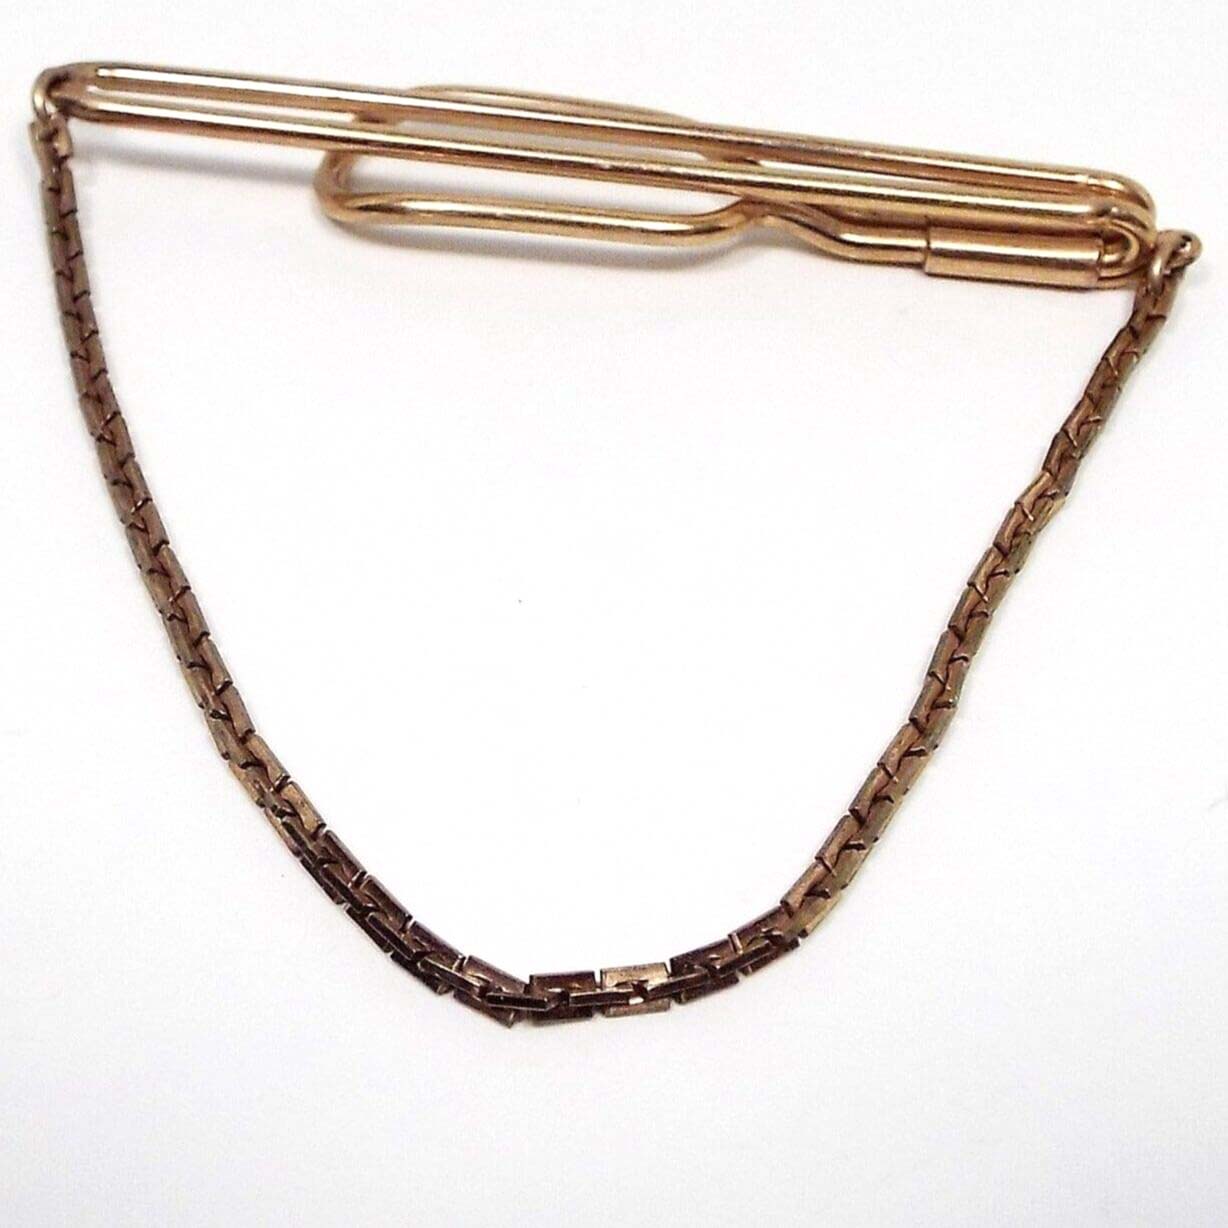 Front view of the 1940's dapper vintage rolled gold plate Swank tie bar chain. The metal is darkened gold tone in color. There is a long open oval wire bar at the top that curves around to the back with another open oval area at the end. The square link chain hangs from each side at the top. 